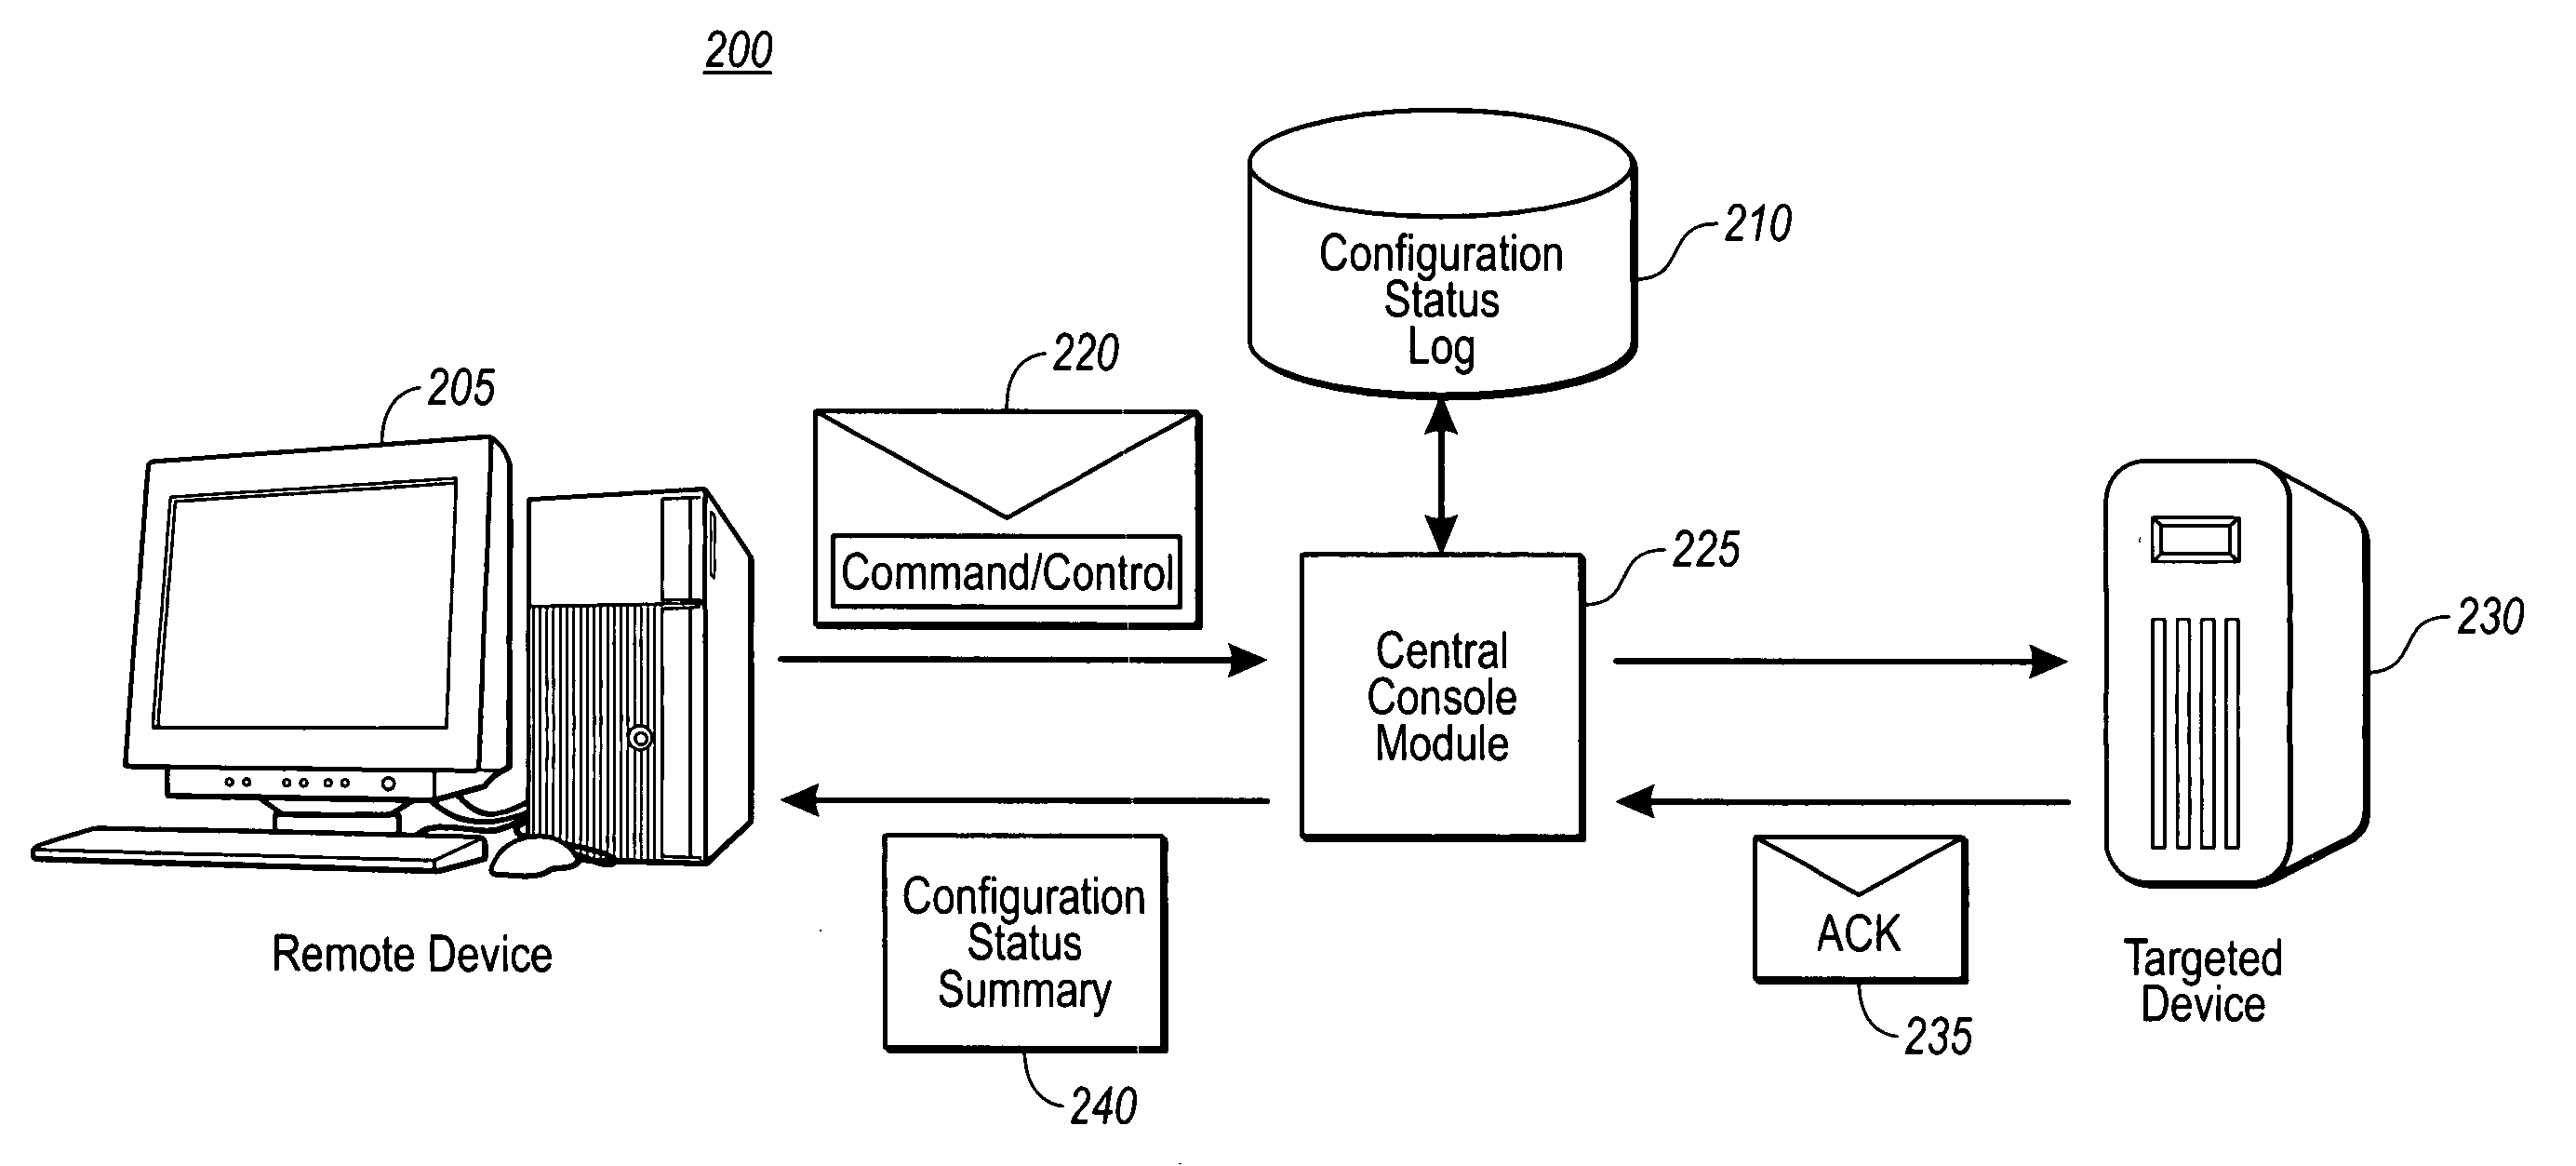 Central console for monitoring configuration status for remote devices